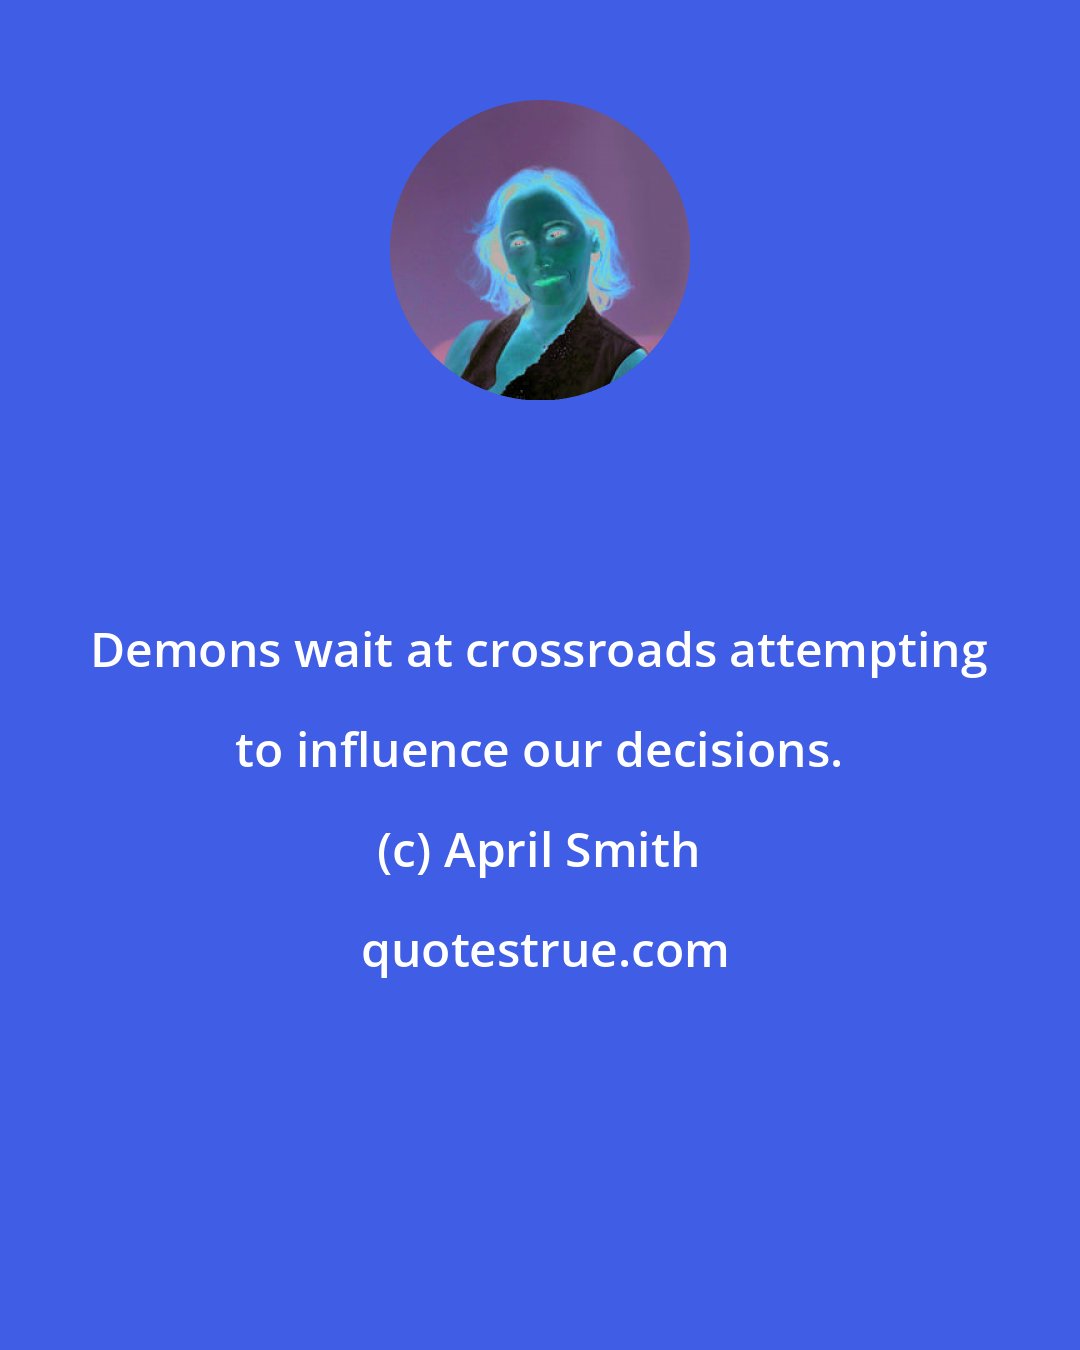 April Smith: Demons wait at crossroads attempting to influence our decisions.